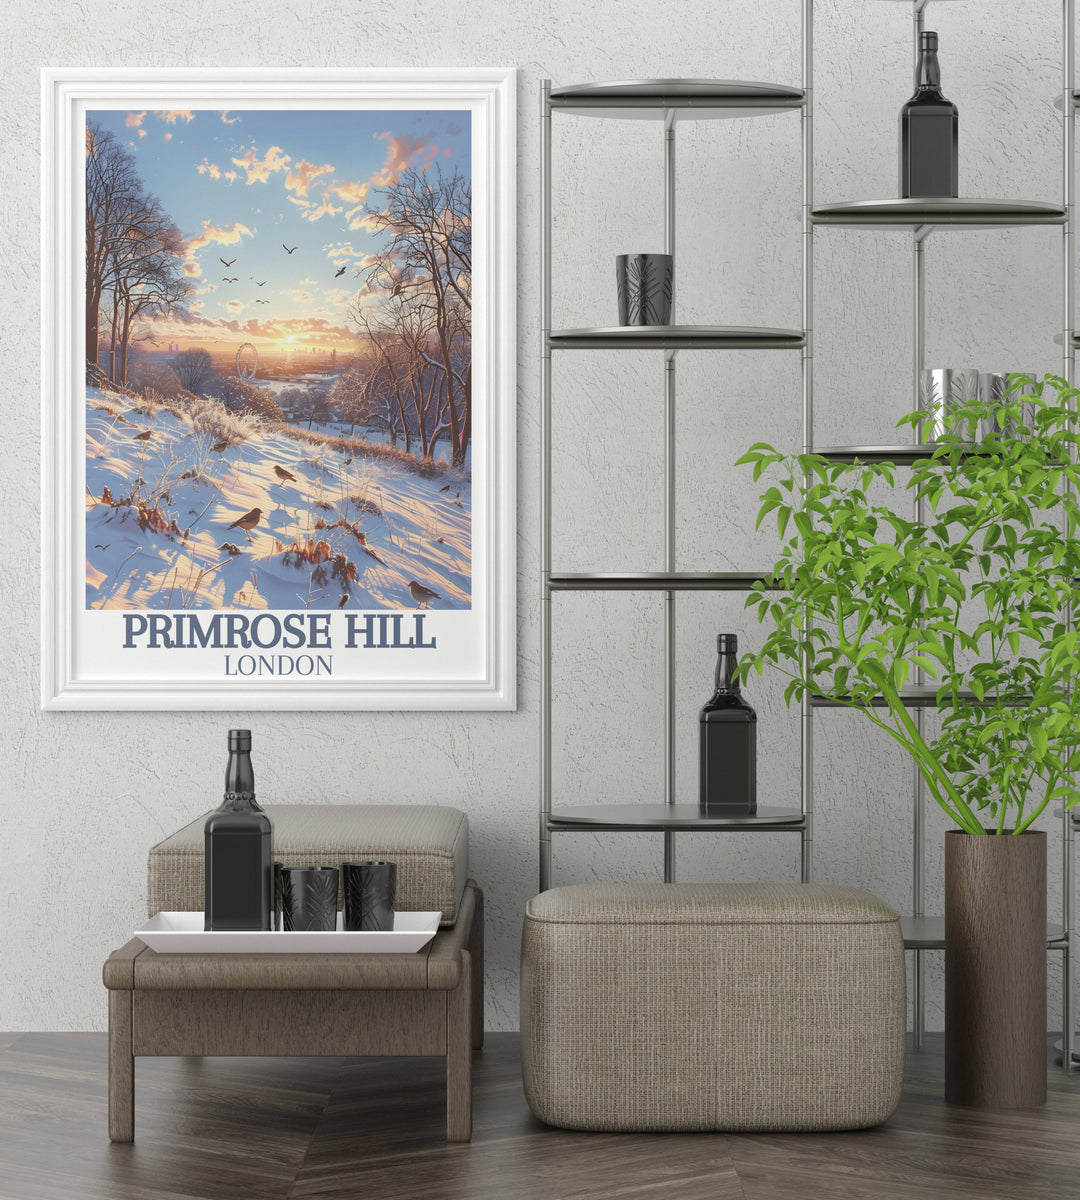 Elegant Framed Art of Primrose Hill, highlighting the serene atmosphere and iconic views of this London favorite.